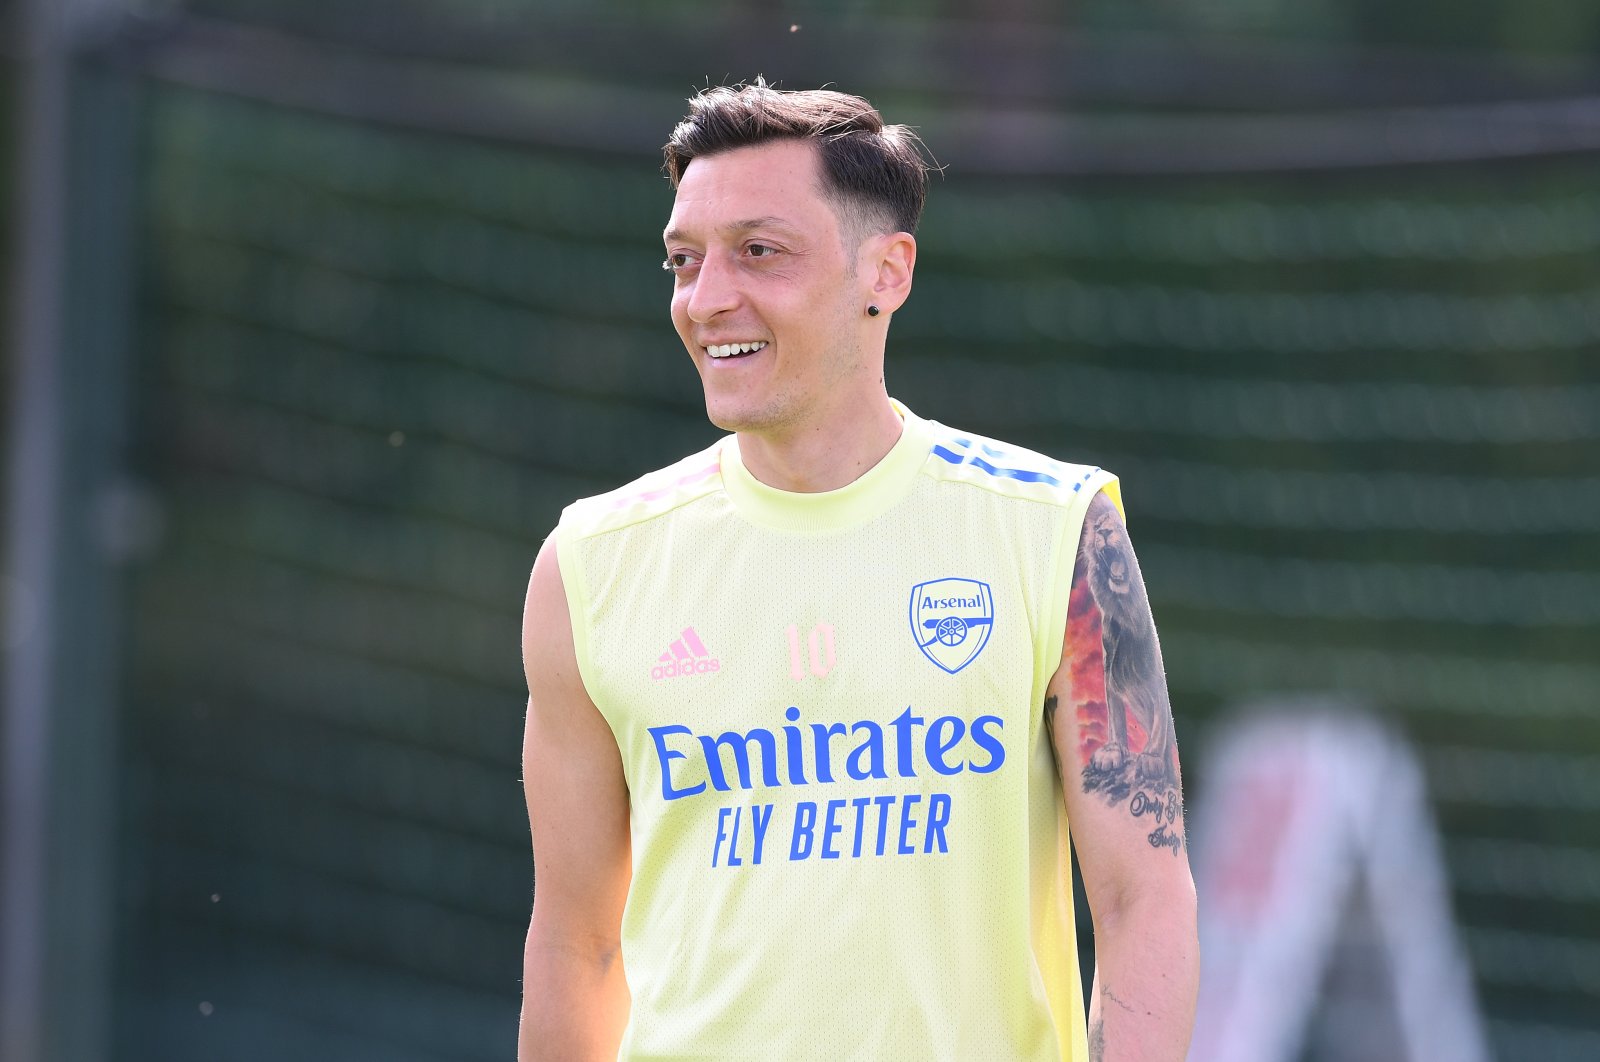 Mesut Özil of Arsenal reacts during a training session at London Colney, in St. Albans, England, June 16, 2020. (Arsenal FC via Getty Images)